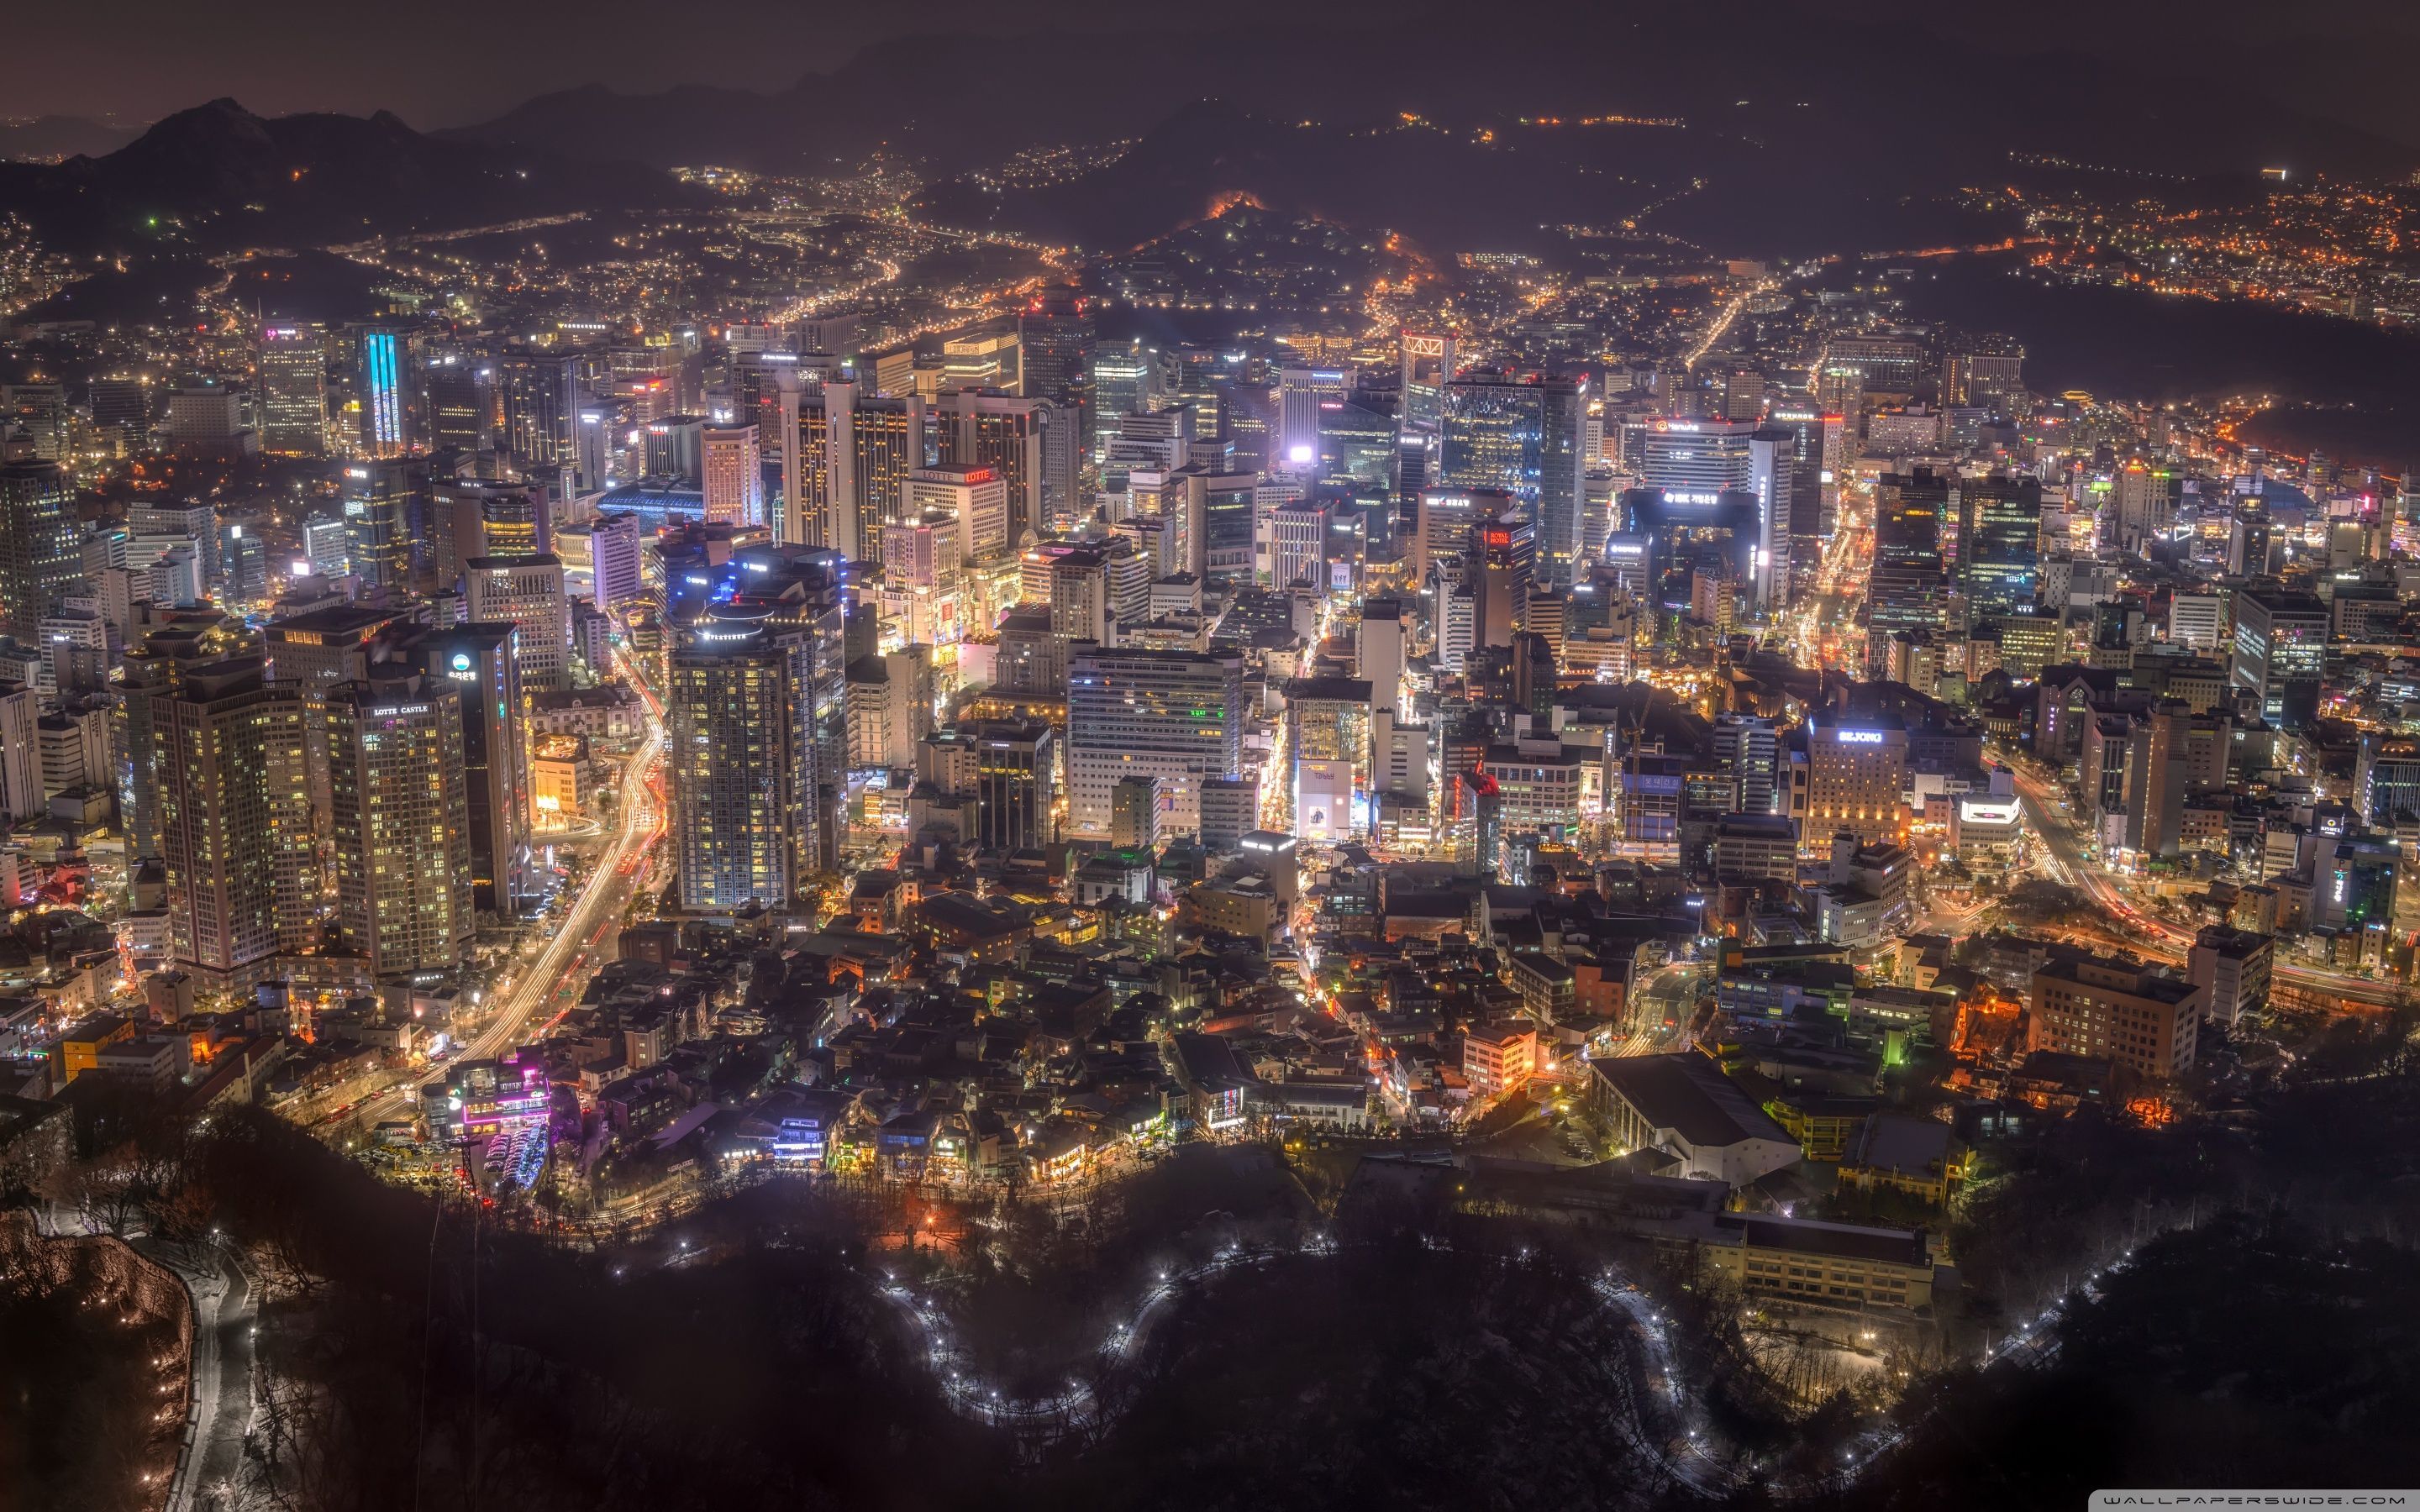 A city at night with many lights - Seoul